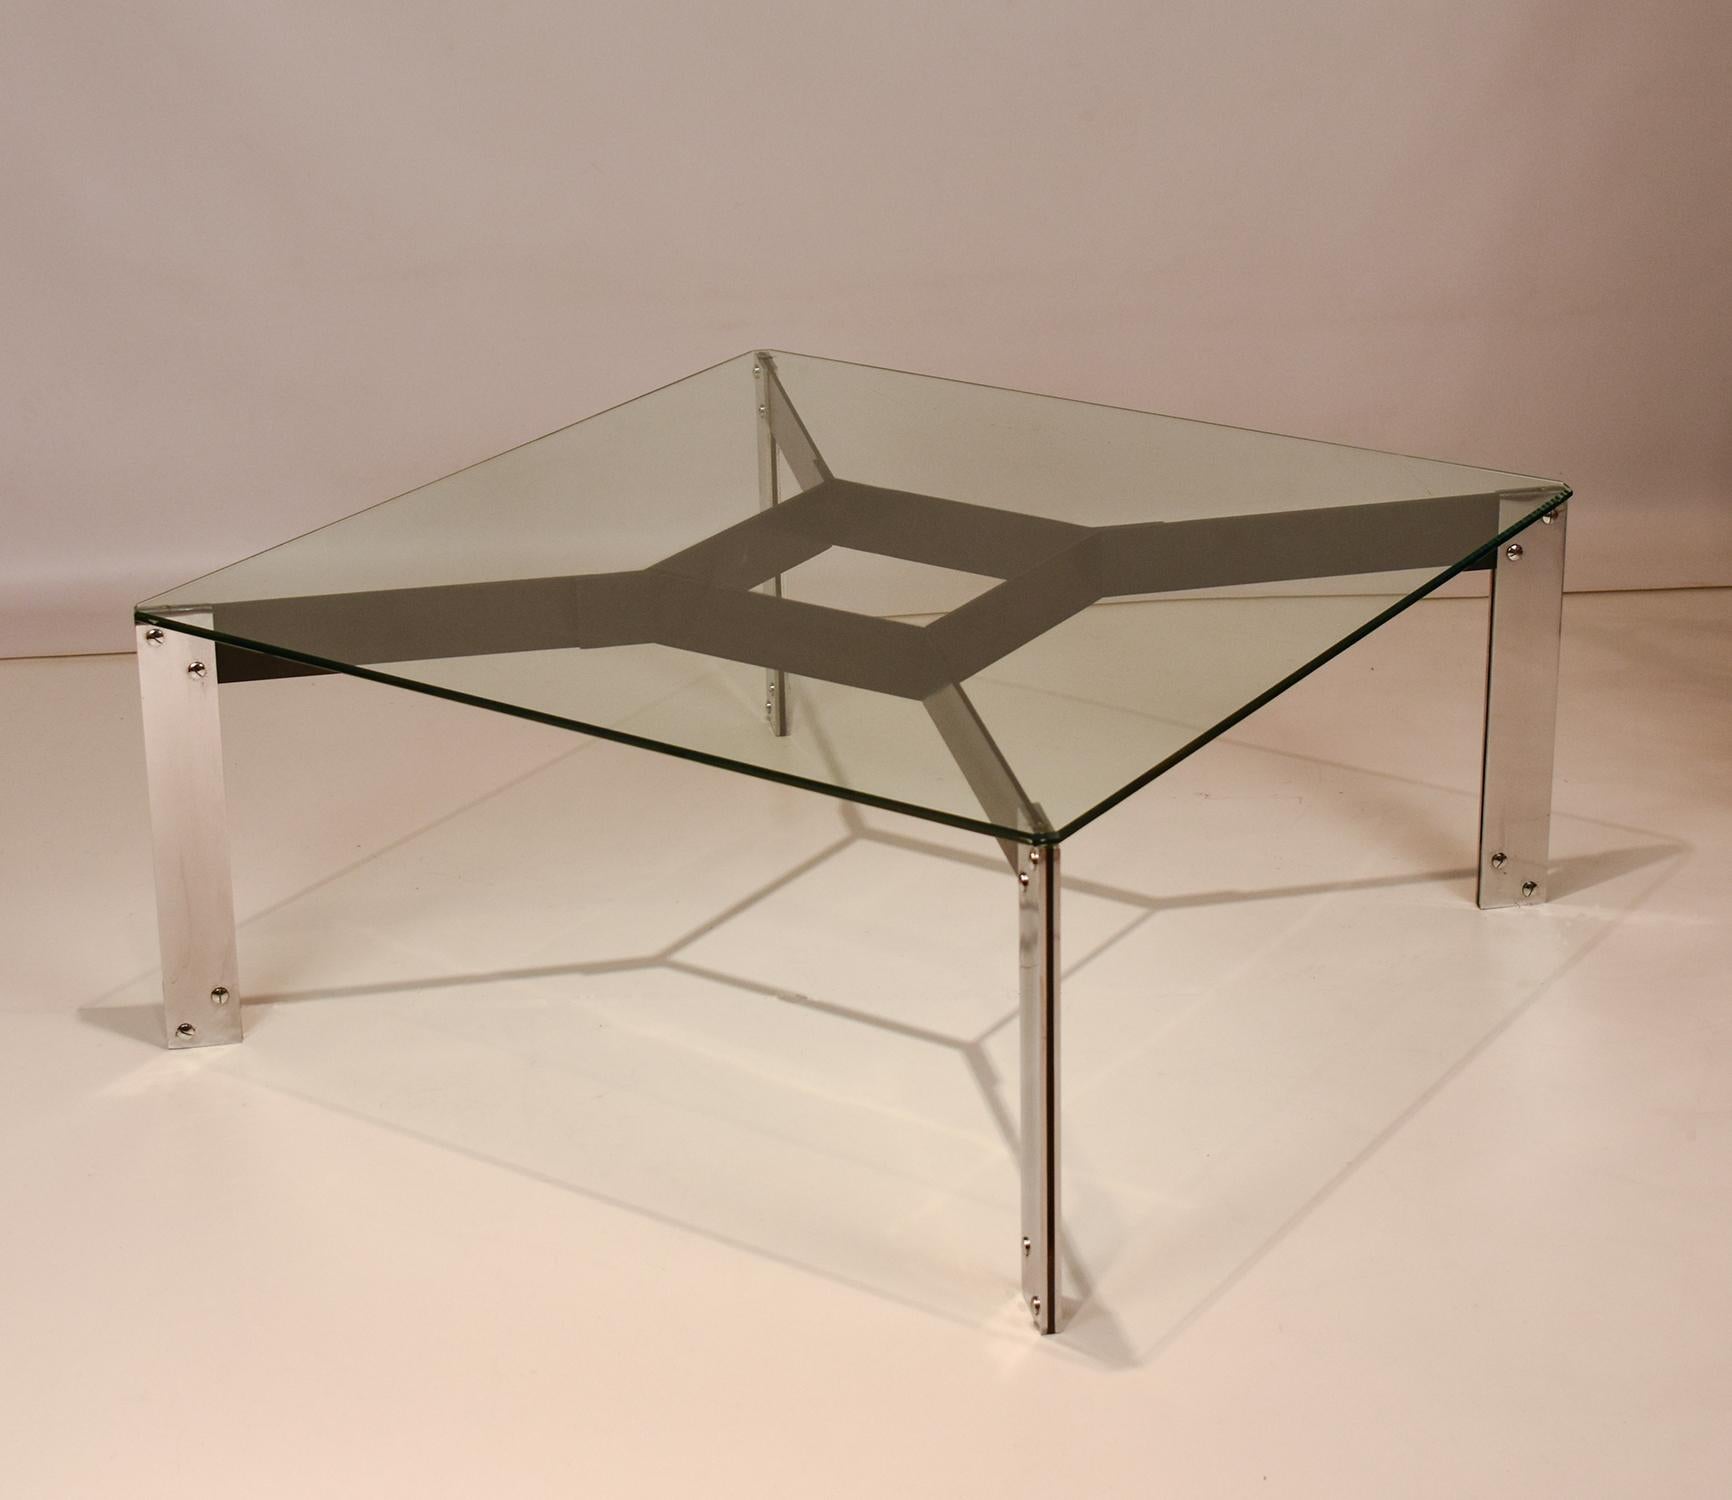 One of the first pieces of furniture designed by Miguel Milá and published by Gres in 1962.

The rectangular tempered and vised glass top rests on a metal structure composed of four chromed iron plate legs attached to a thin black iron frame.

This